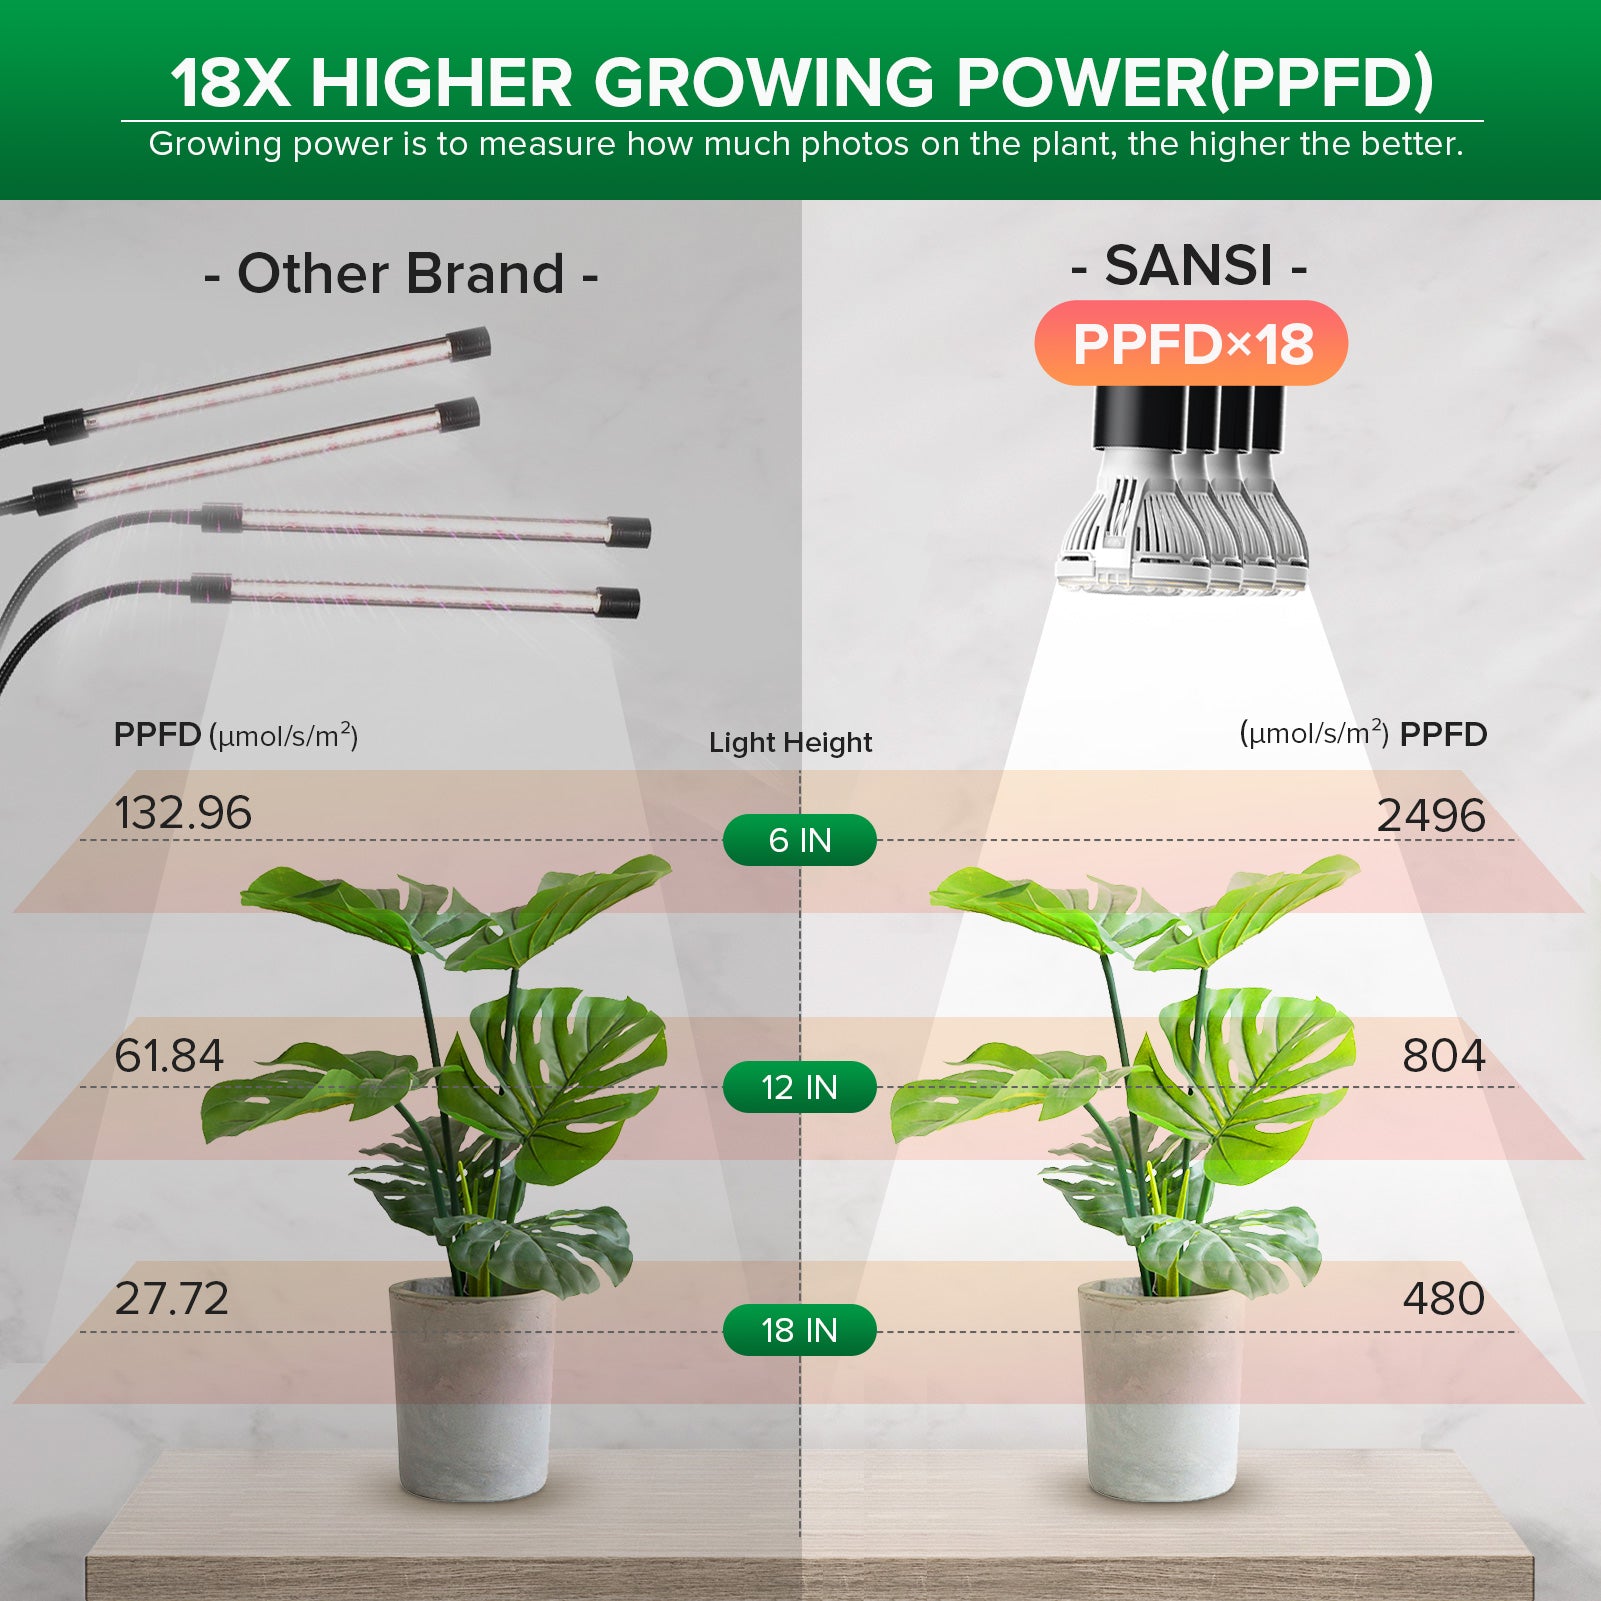 18X HIGHER GROWING POWER(PPFD),At 6, 12, and 18 inches from plants, PPFD values are 2,496,804 and 480 (μmol/s/m²) respectively.